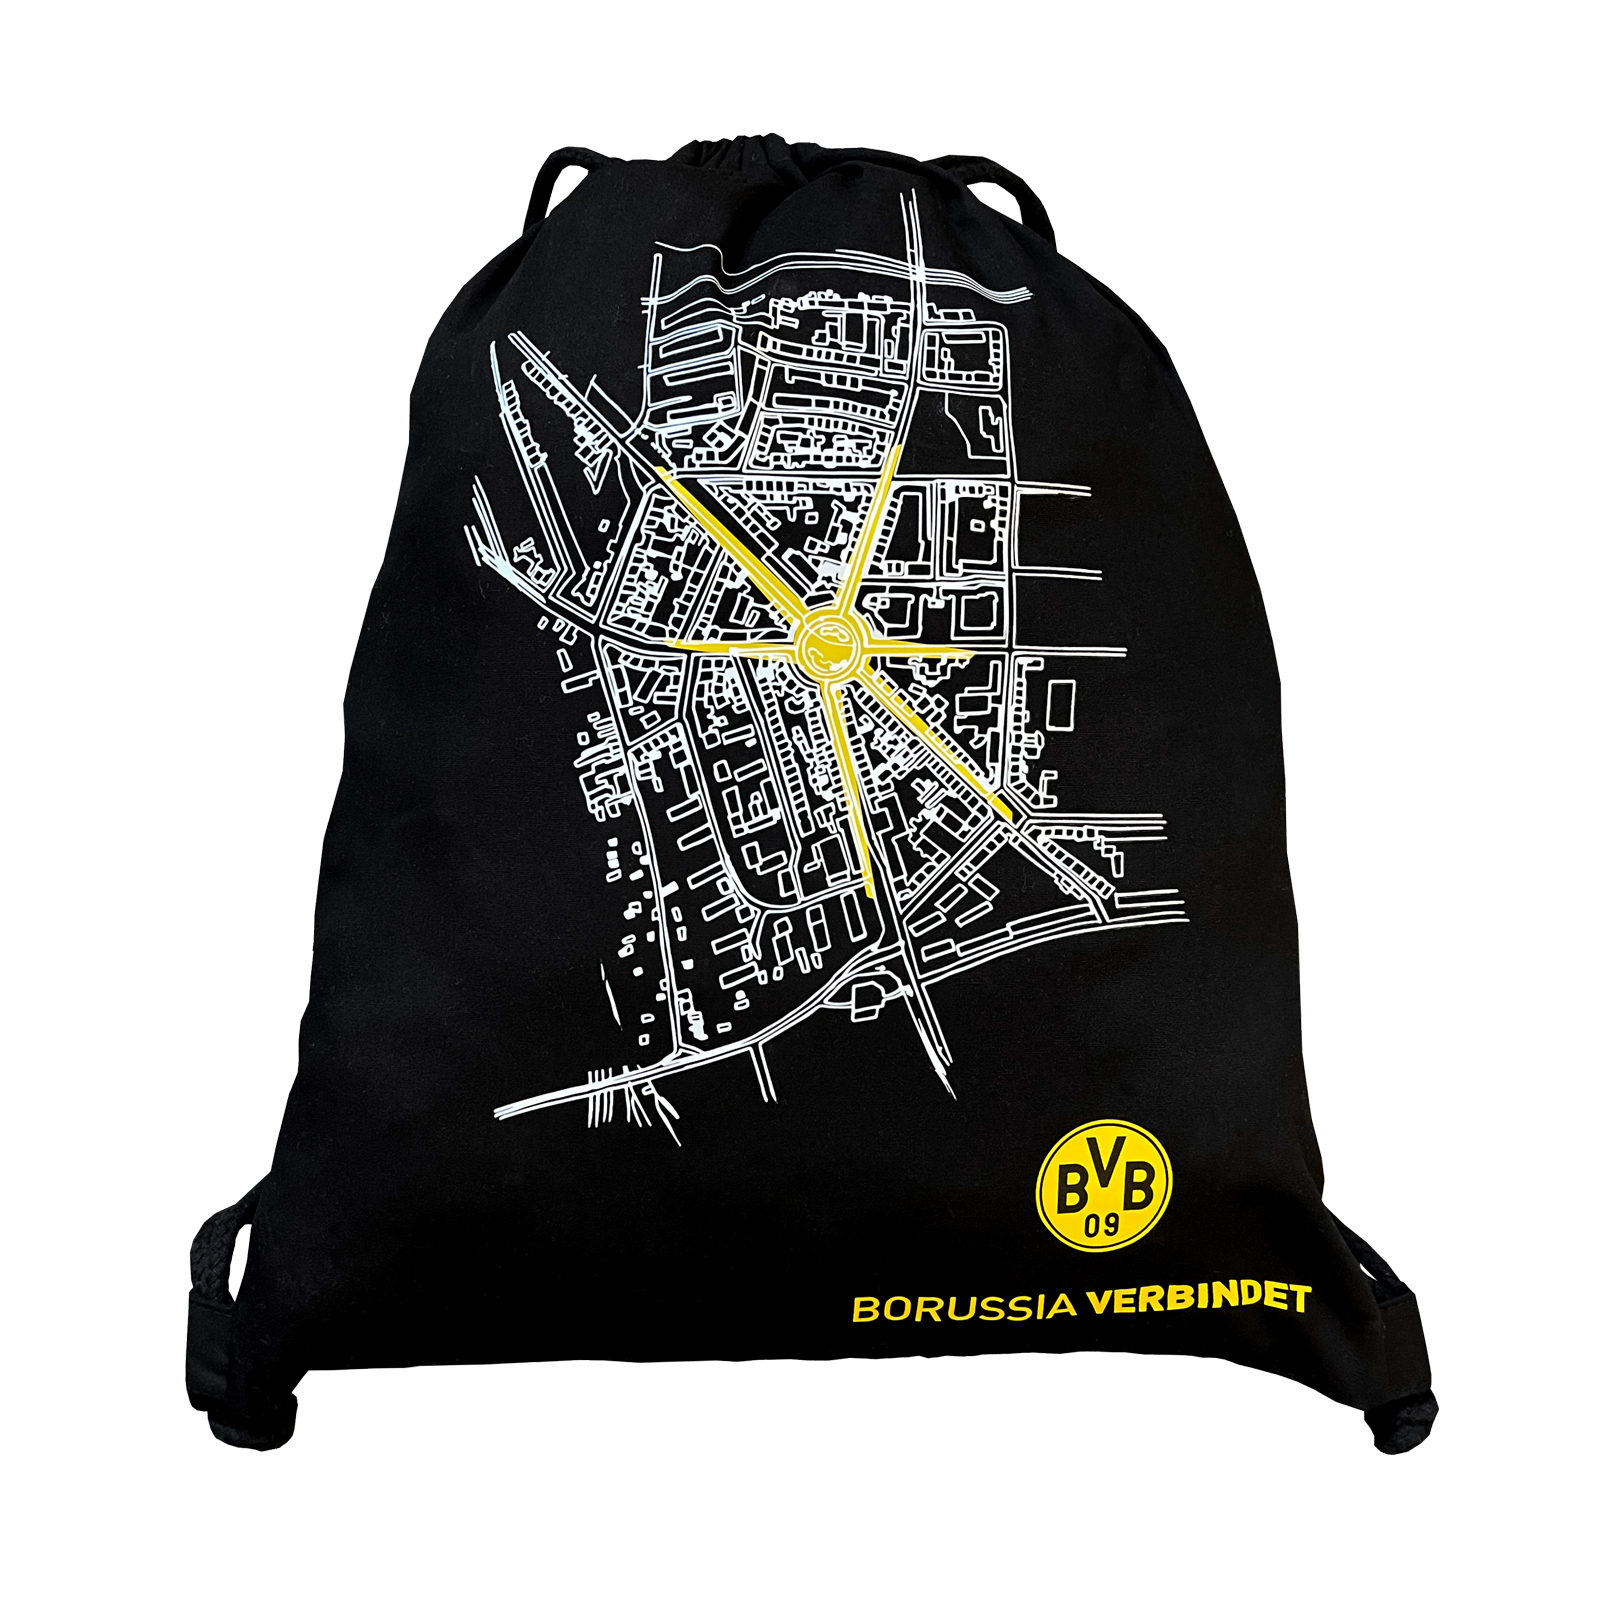 Bags | Accessories | BVB Onlineshop